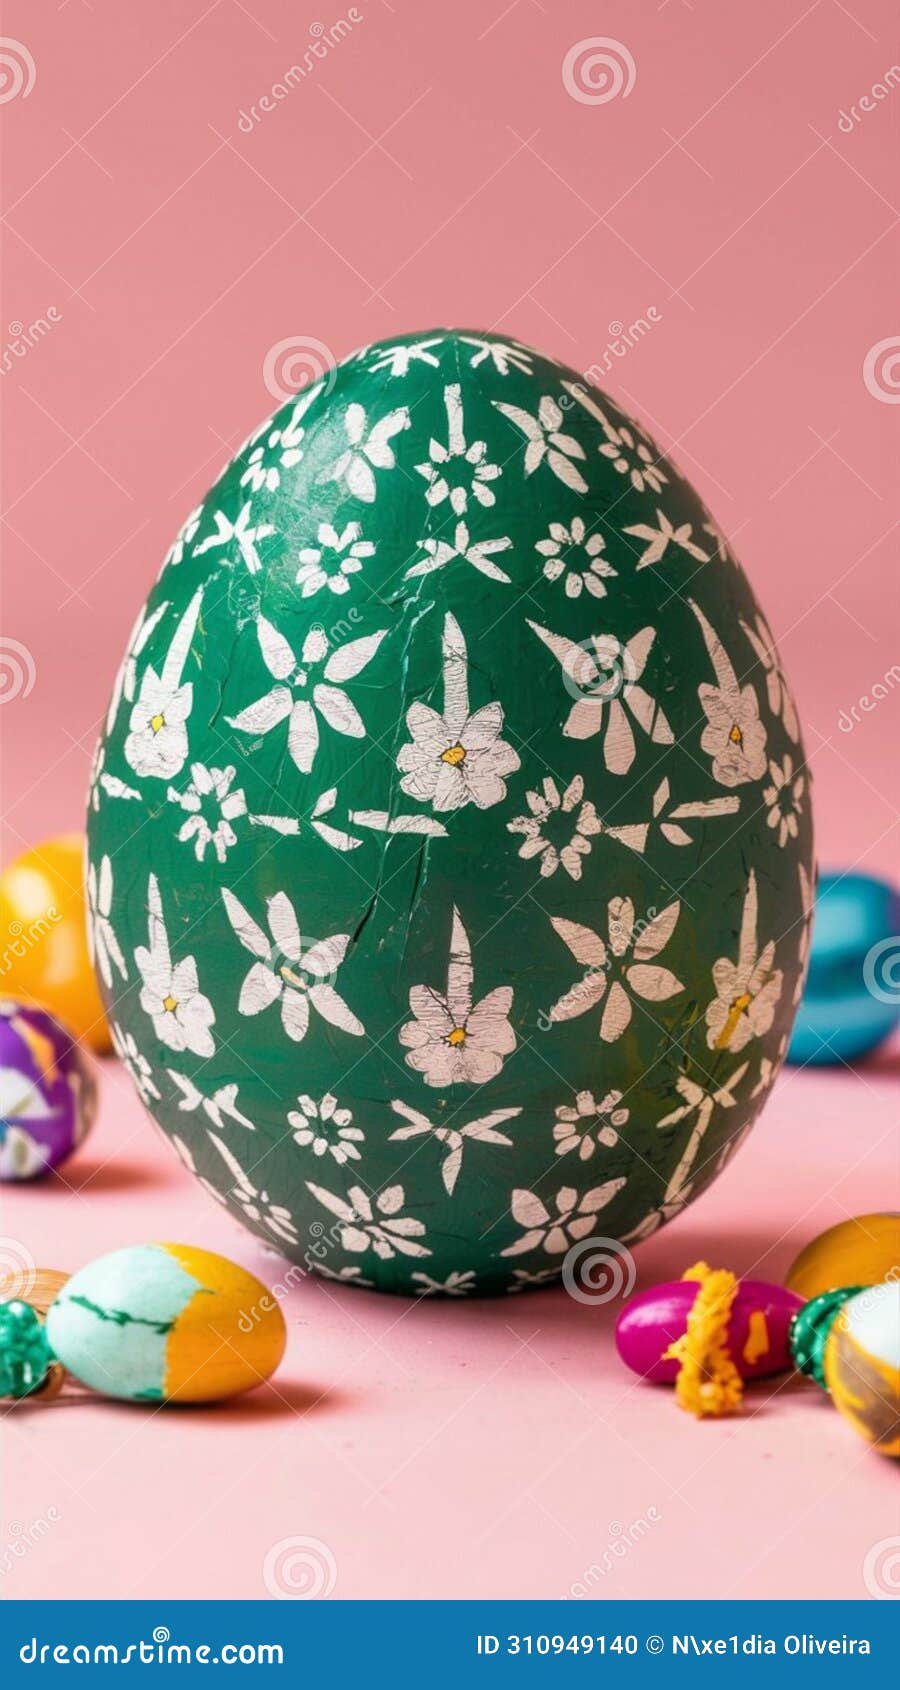 large easter egg with predominantly green s, a little white also appears on a very light pink background.